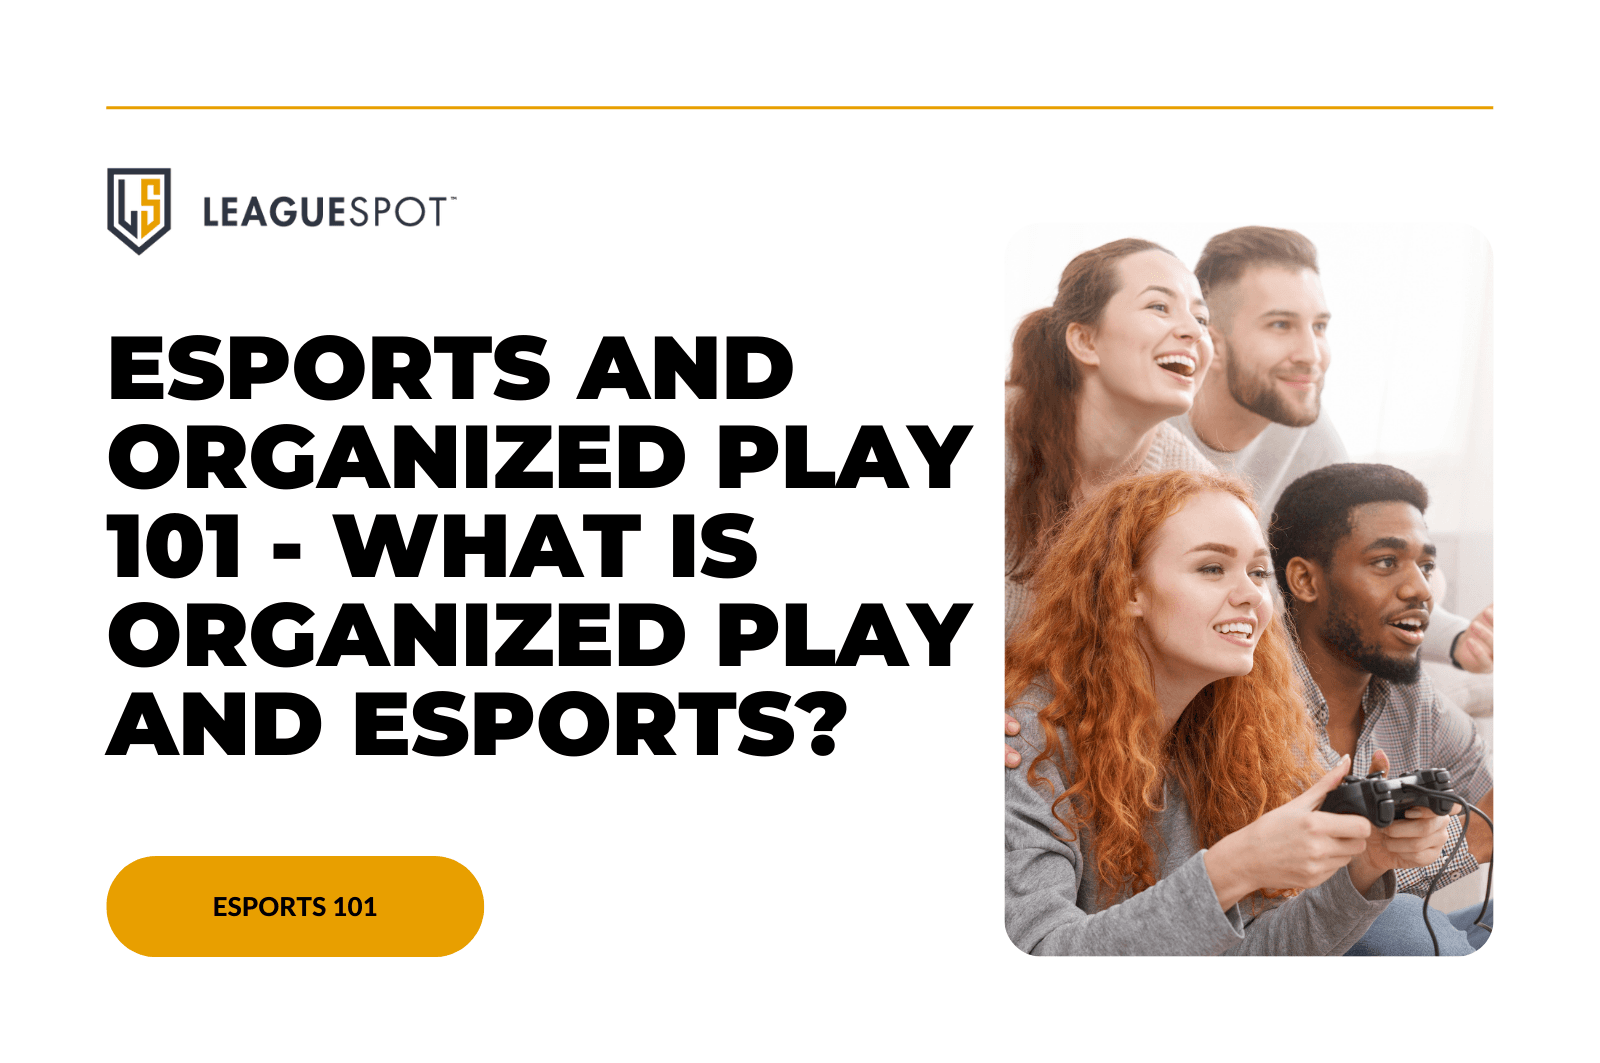 Esports and organized play